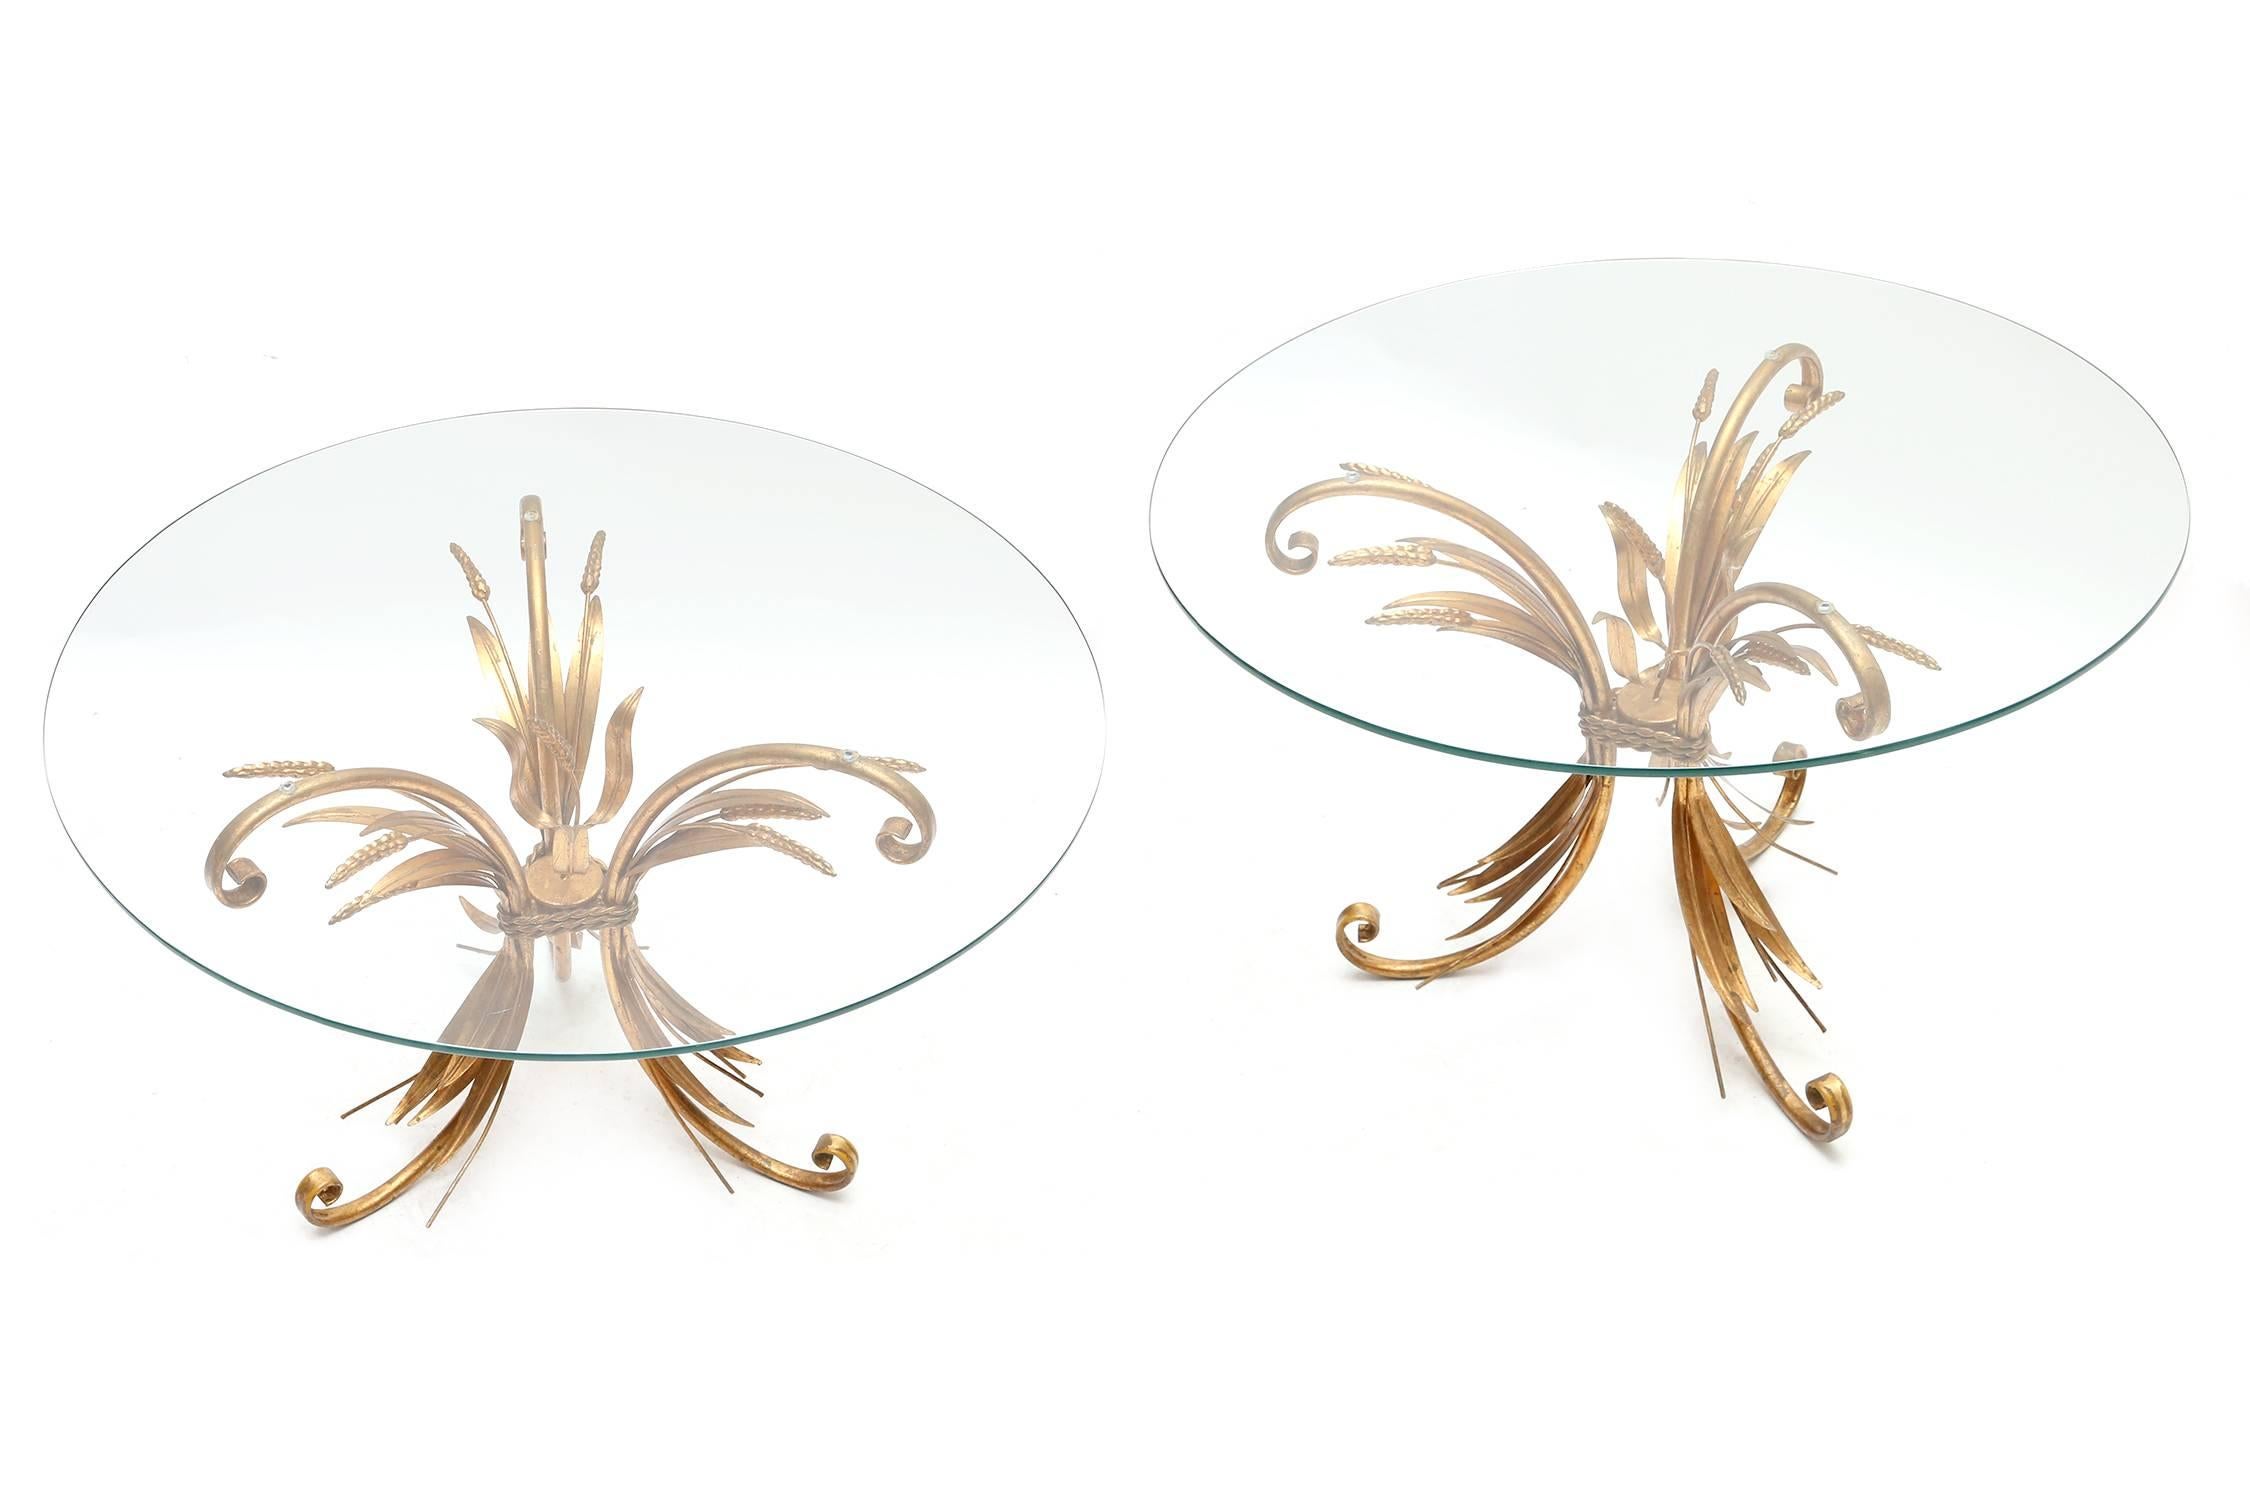 Pair of Coco Chanel side tables,
gilt wheat sheaf.
France, 1970s.
Measures: Ø 80 cm H 50 cm.

          